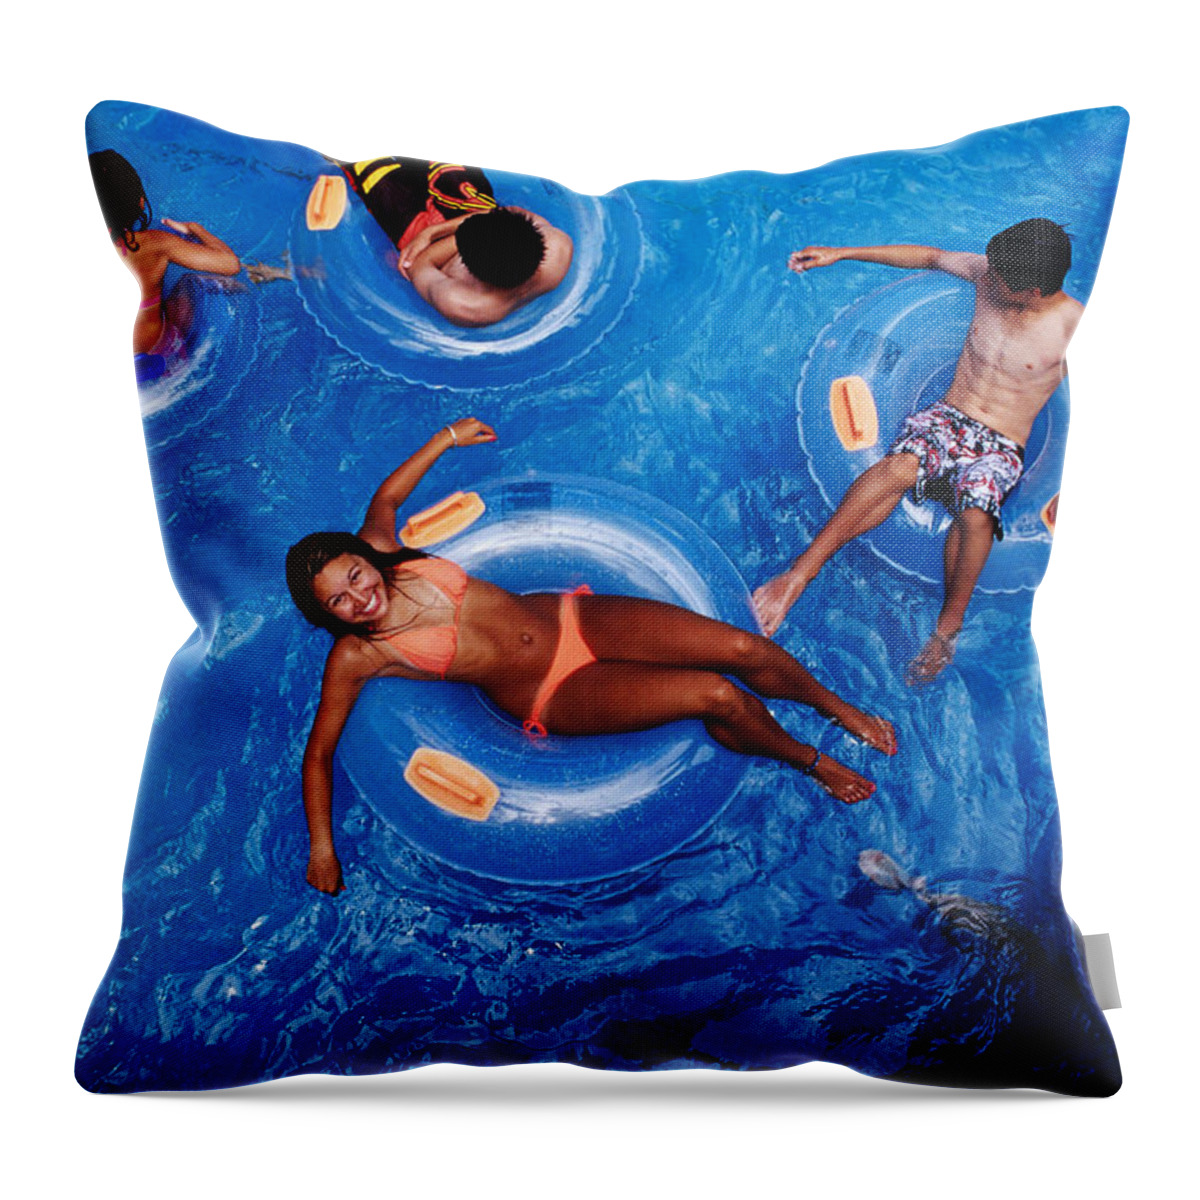 People Throw Pillow featuring the photograph People Floating In Pool On Rubber Rings by Richard I'anson